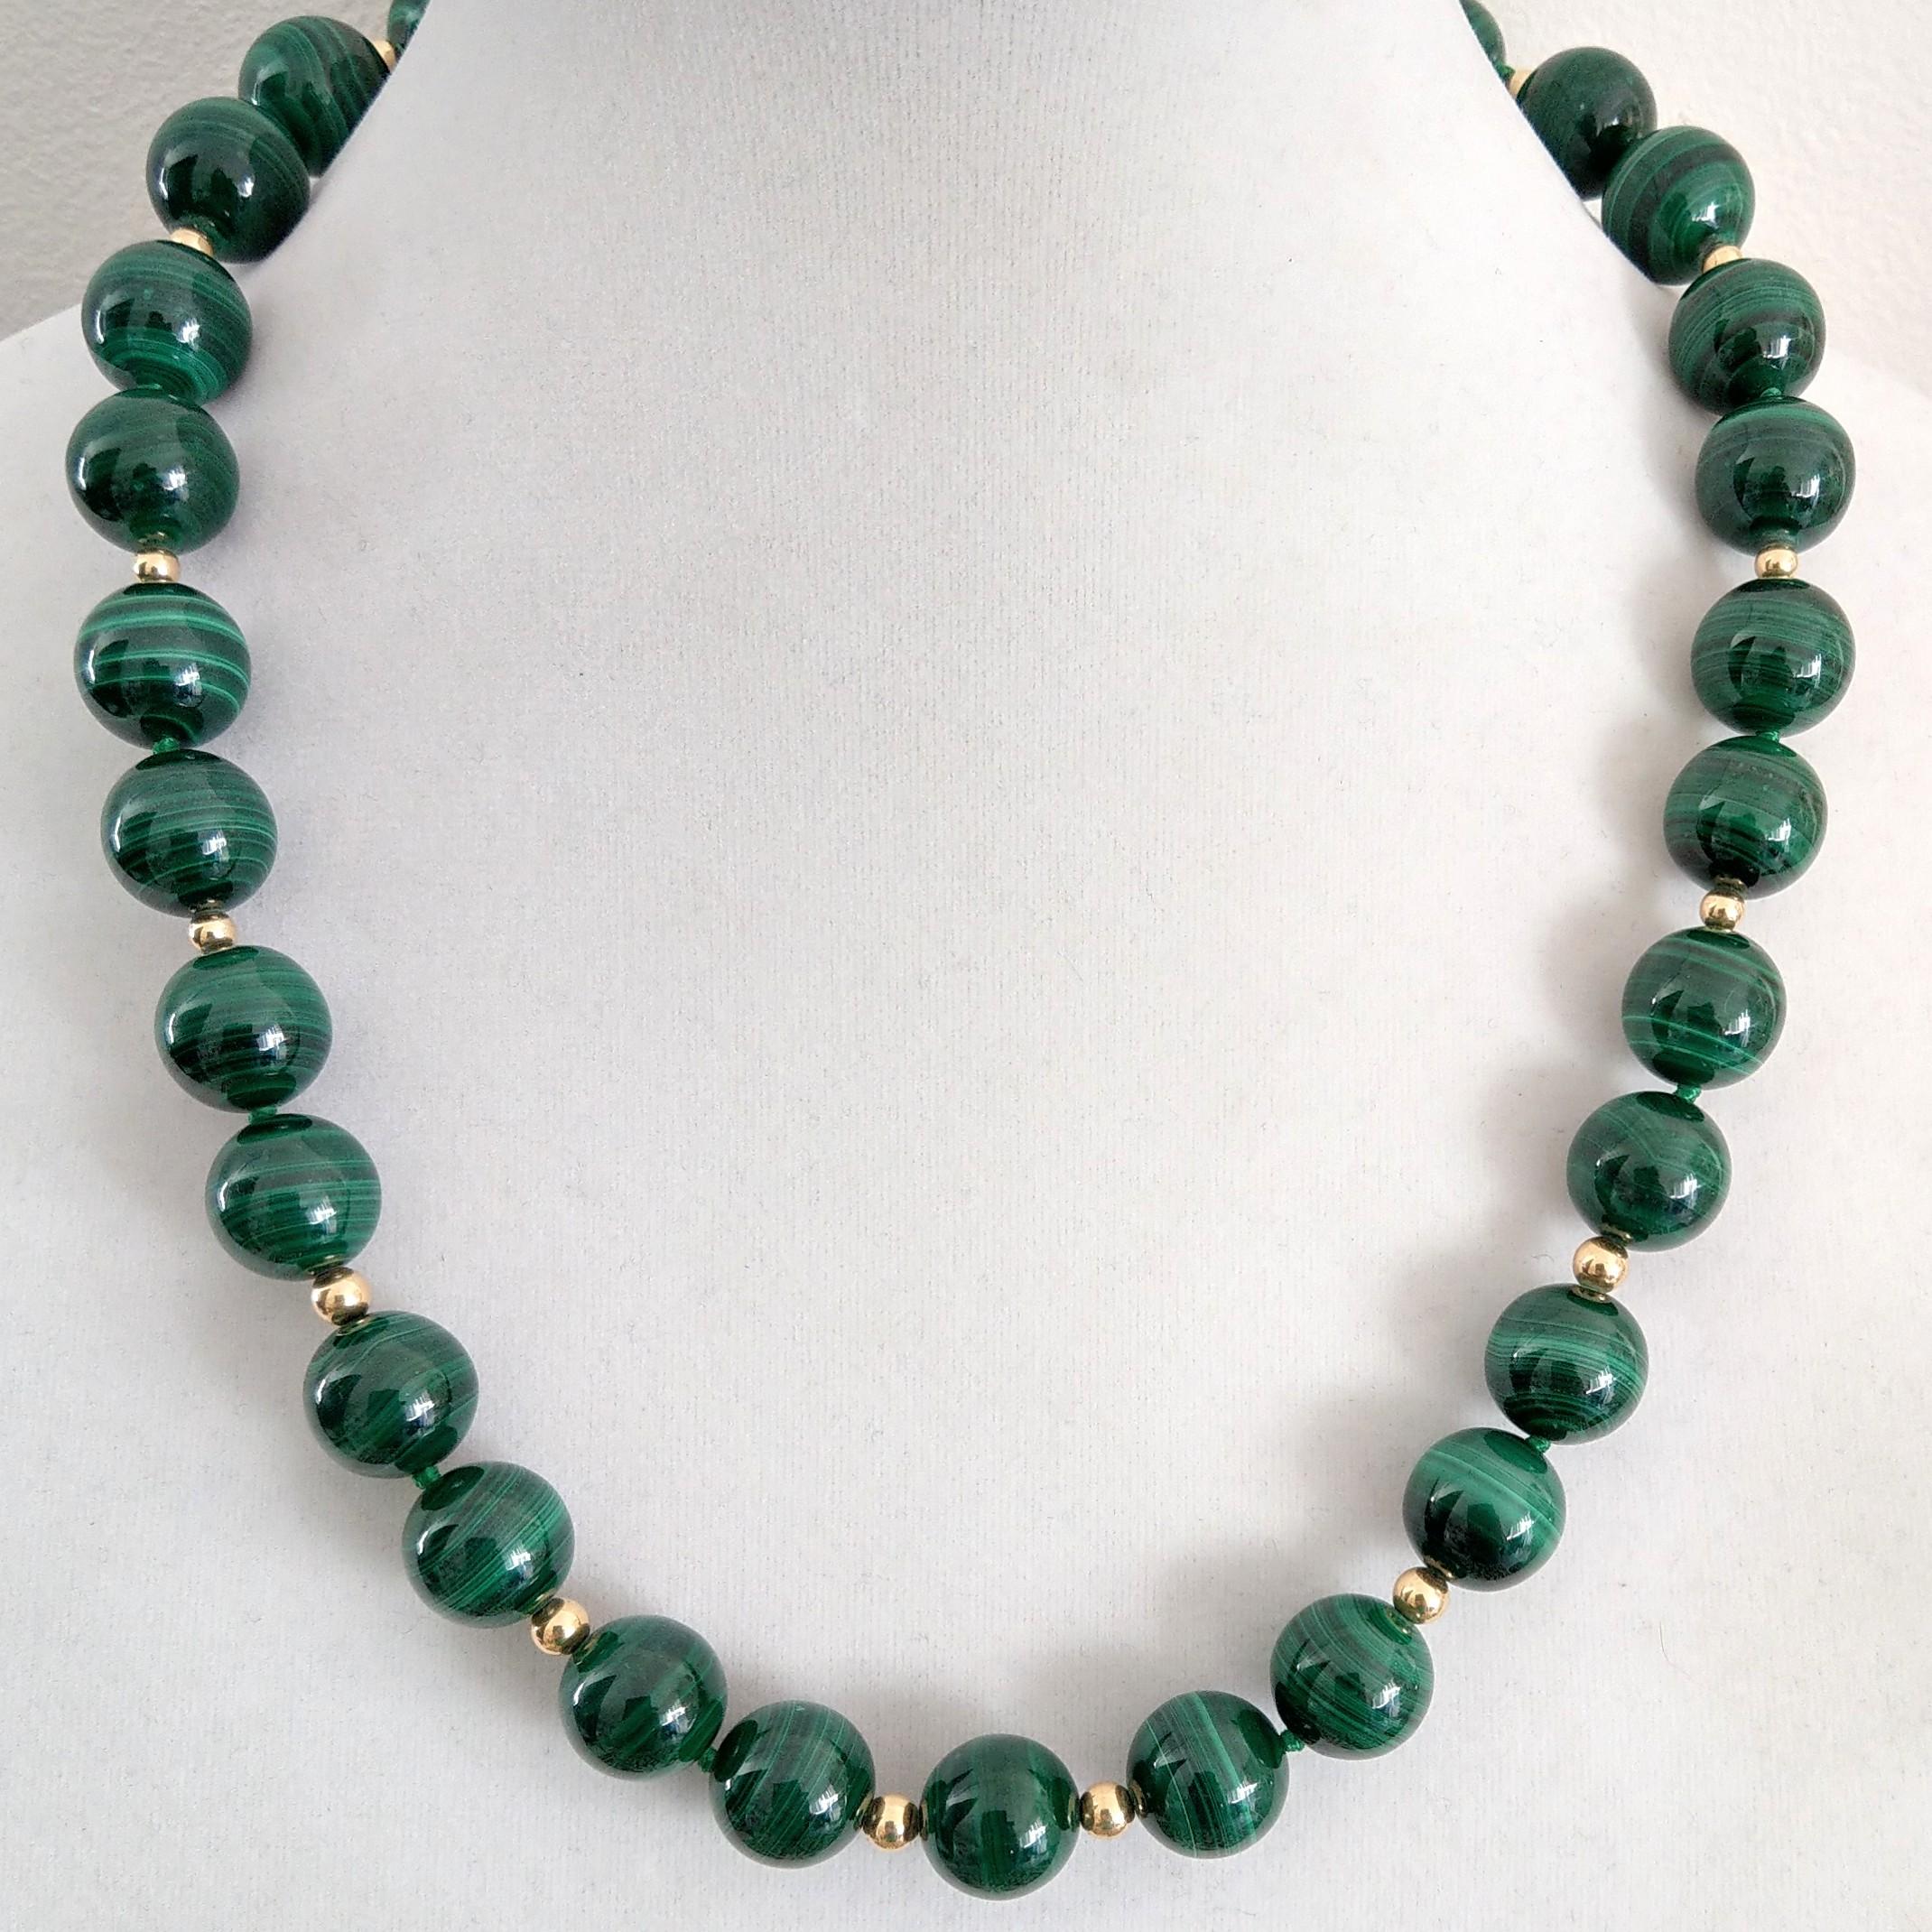 Decadent Jewels Malachite Polished High Grade Spheres Gold Necklace For Sale 1